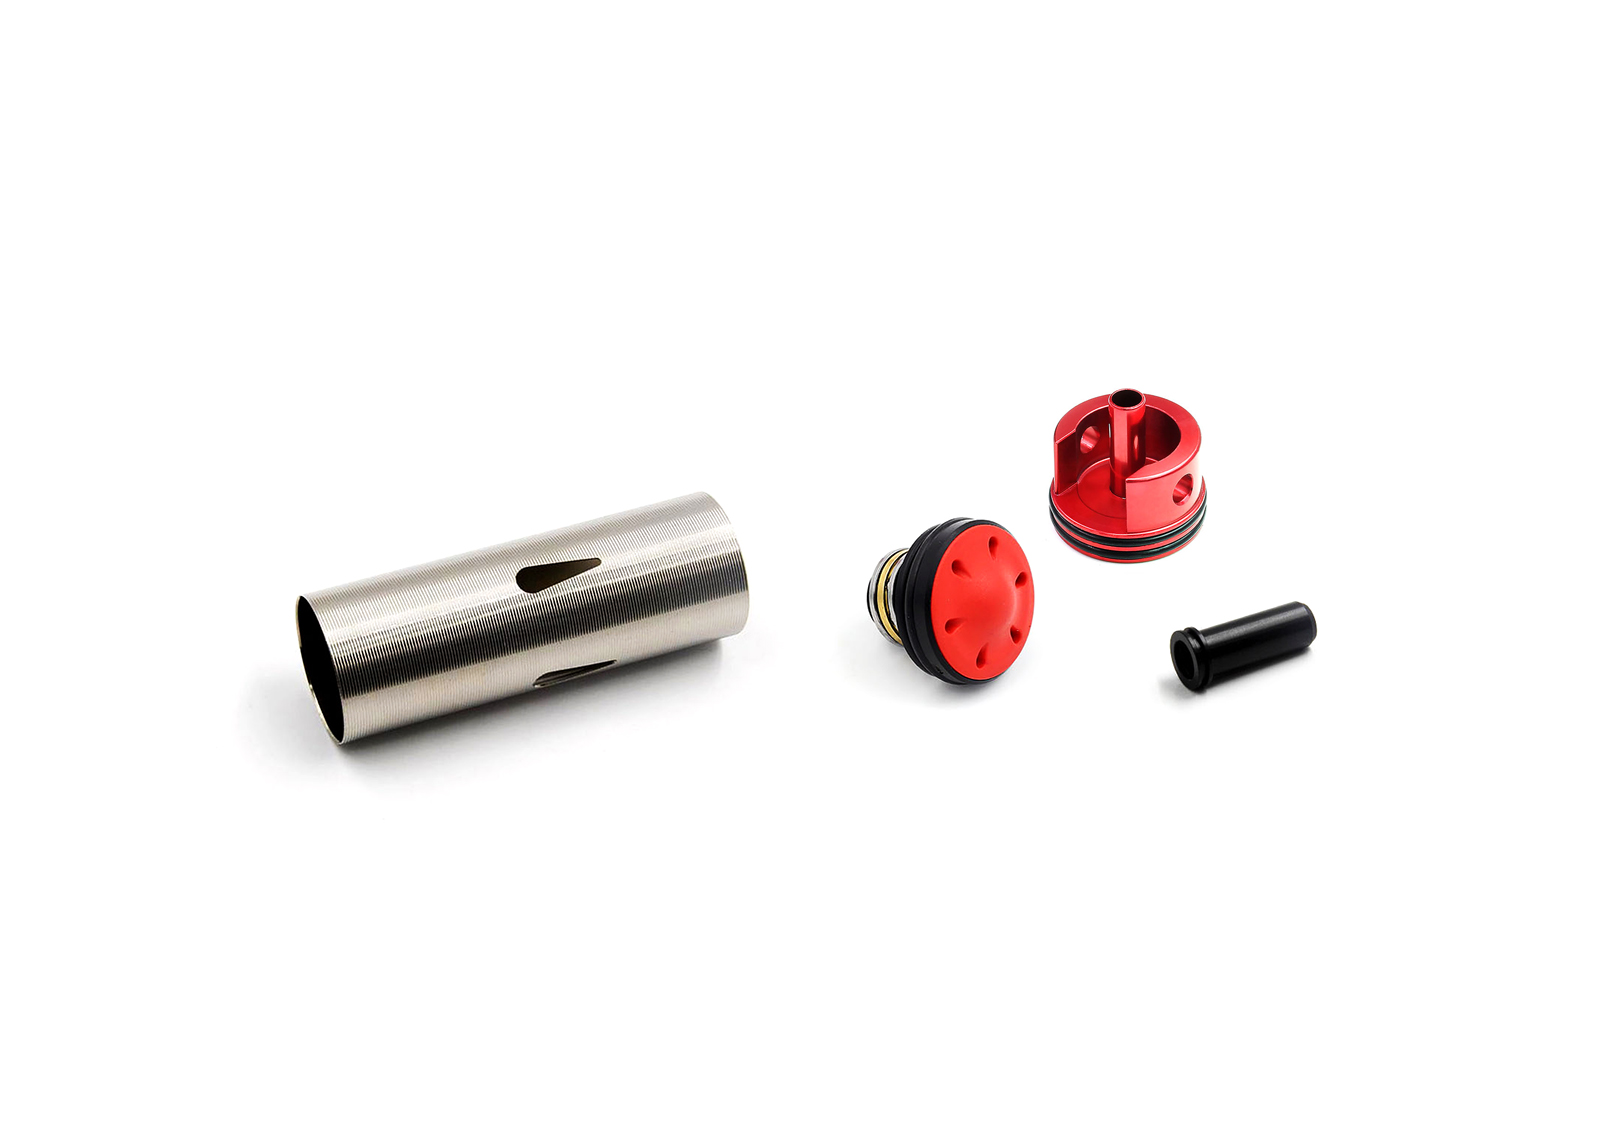 Bore-Up Cylinder Set for MP5K/PDW - Modify AEG Airsoft parts